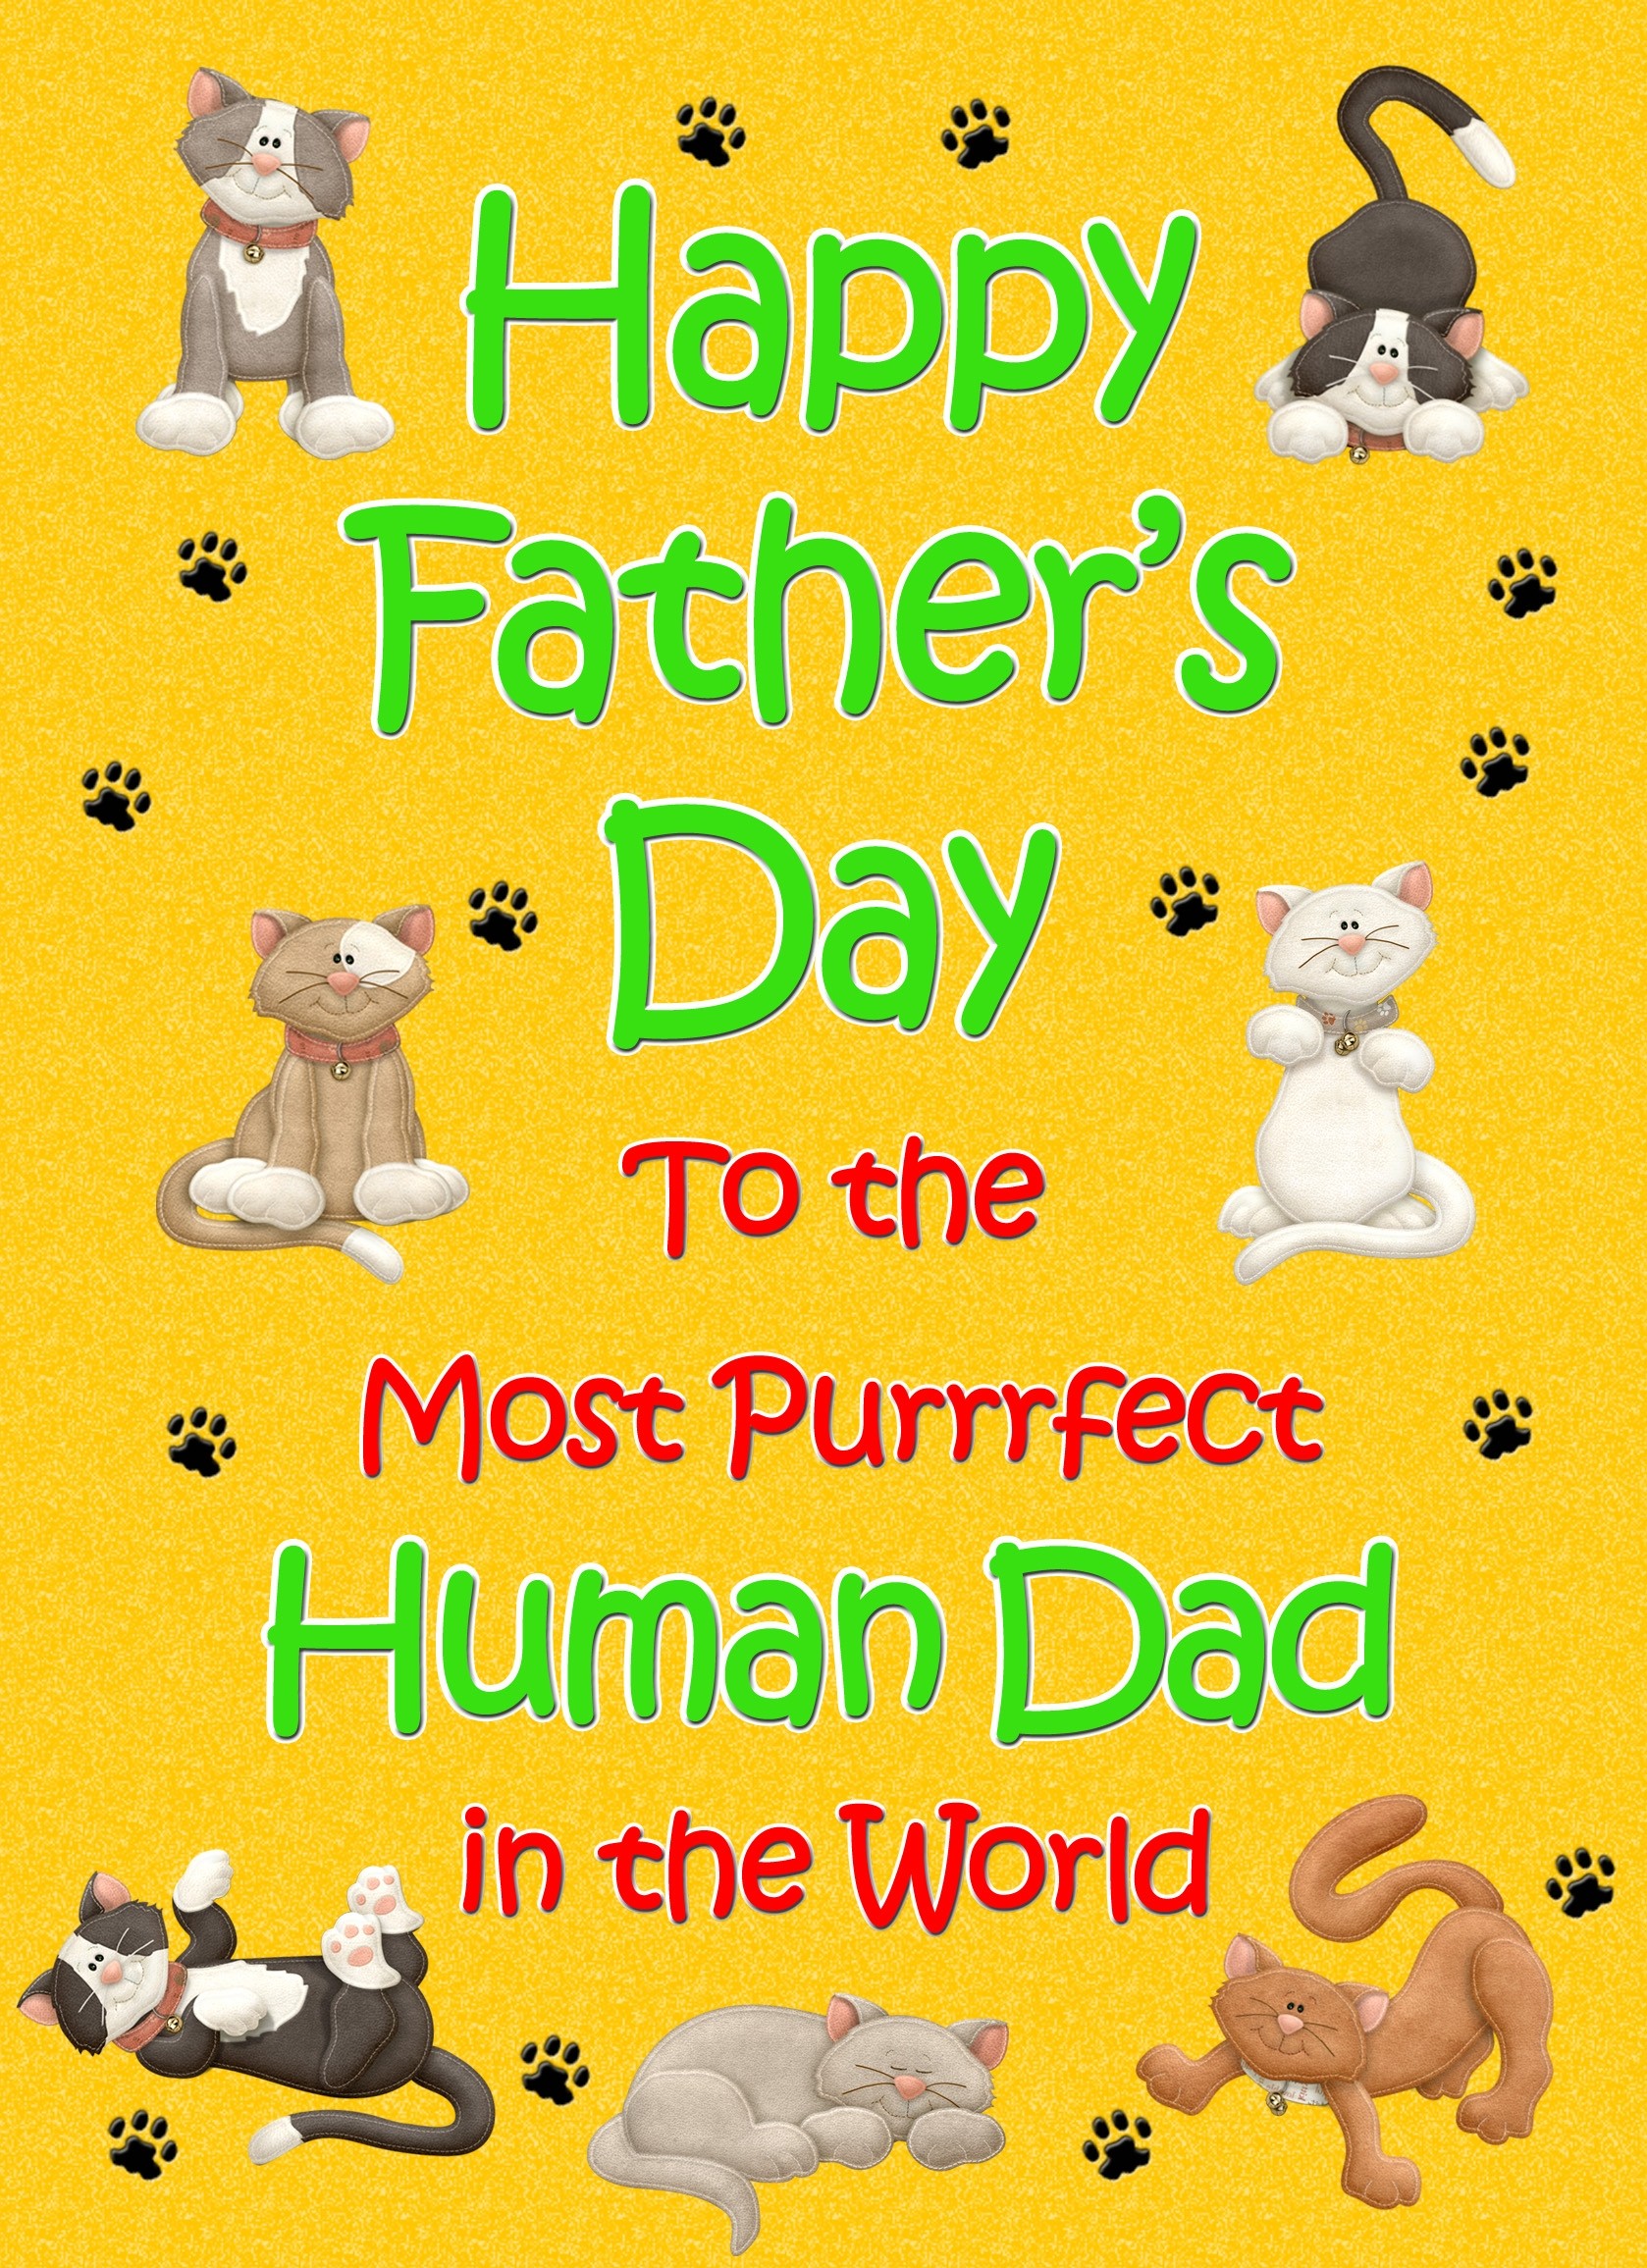 From The Cat Fathers Day Card (Yellow, Purrrfect Human Dad)